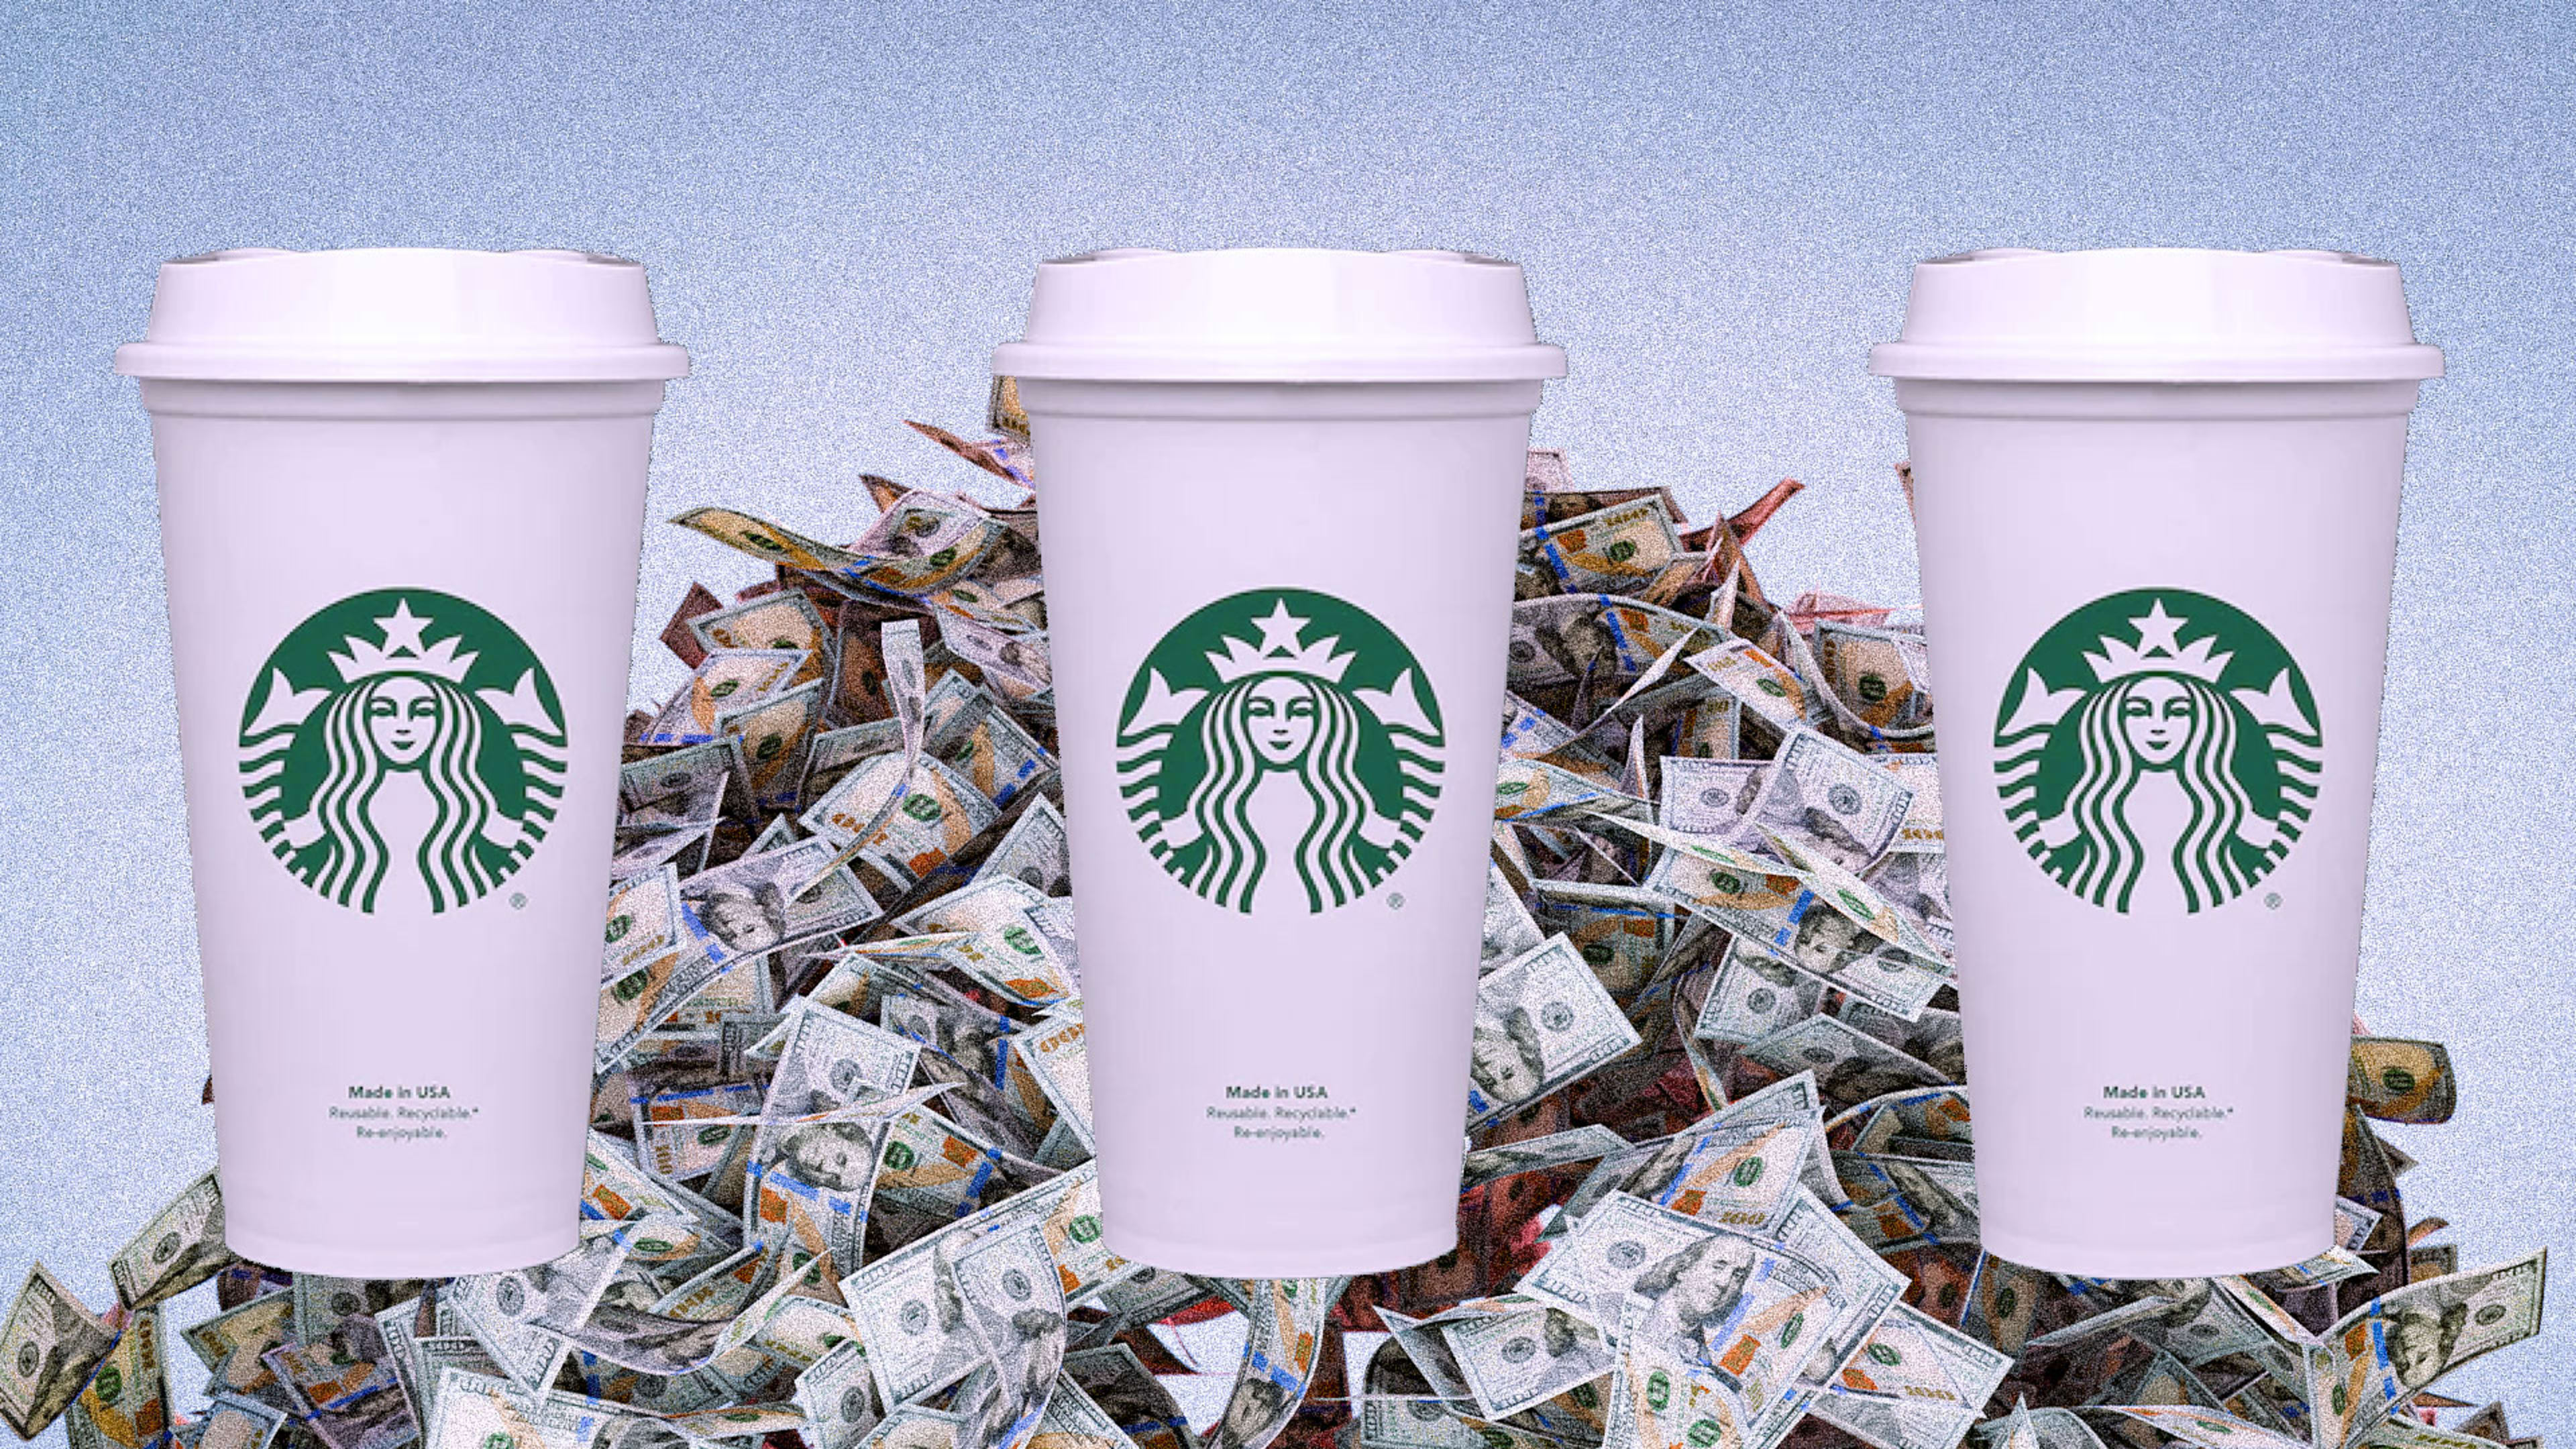 Starbucks illegally denied pay and benefits to thousands of unionized workers, says NLRB